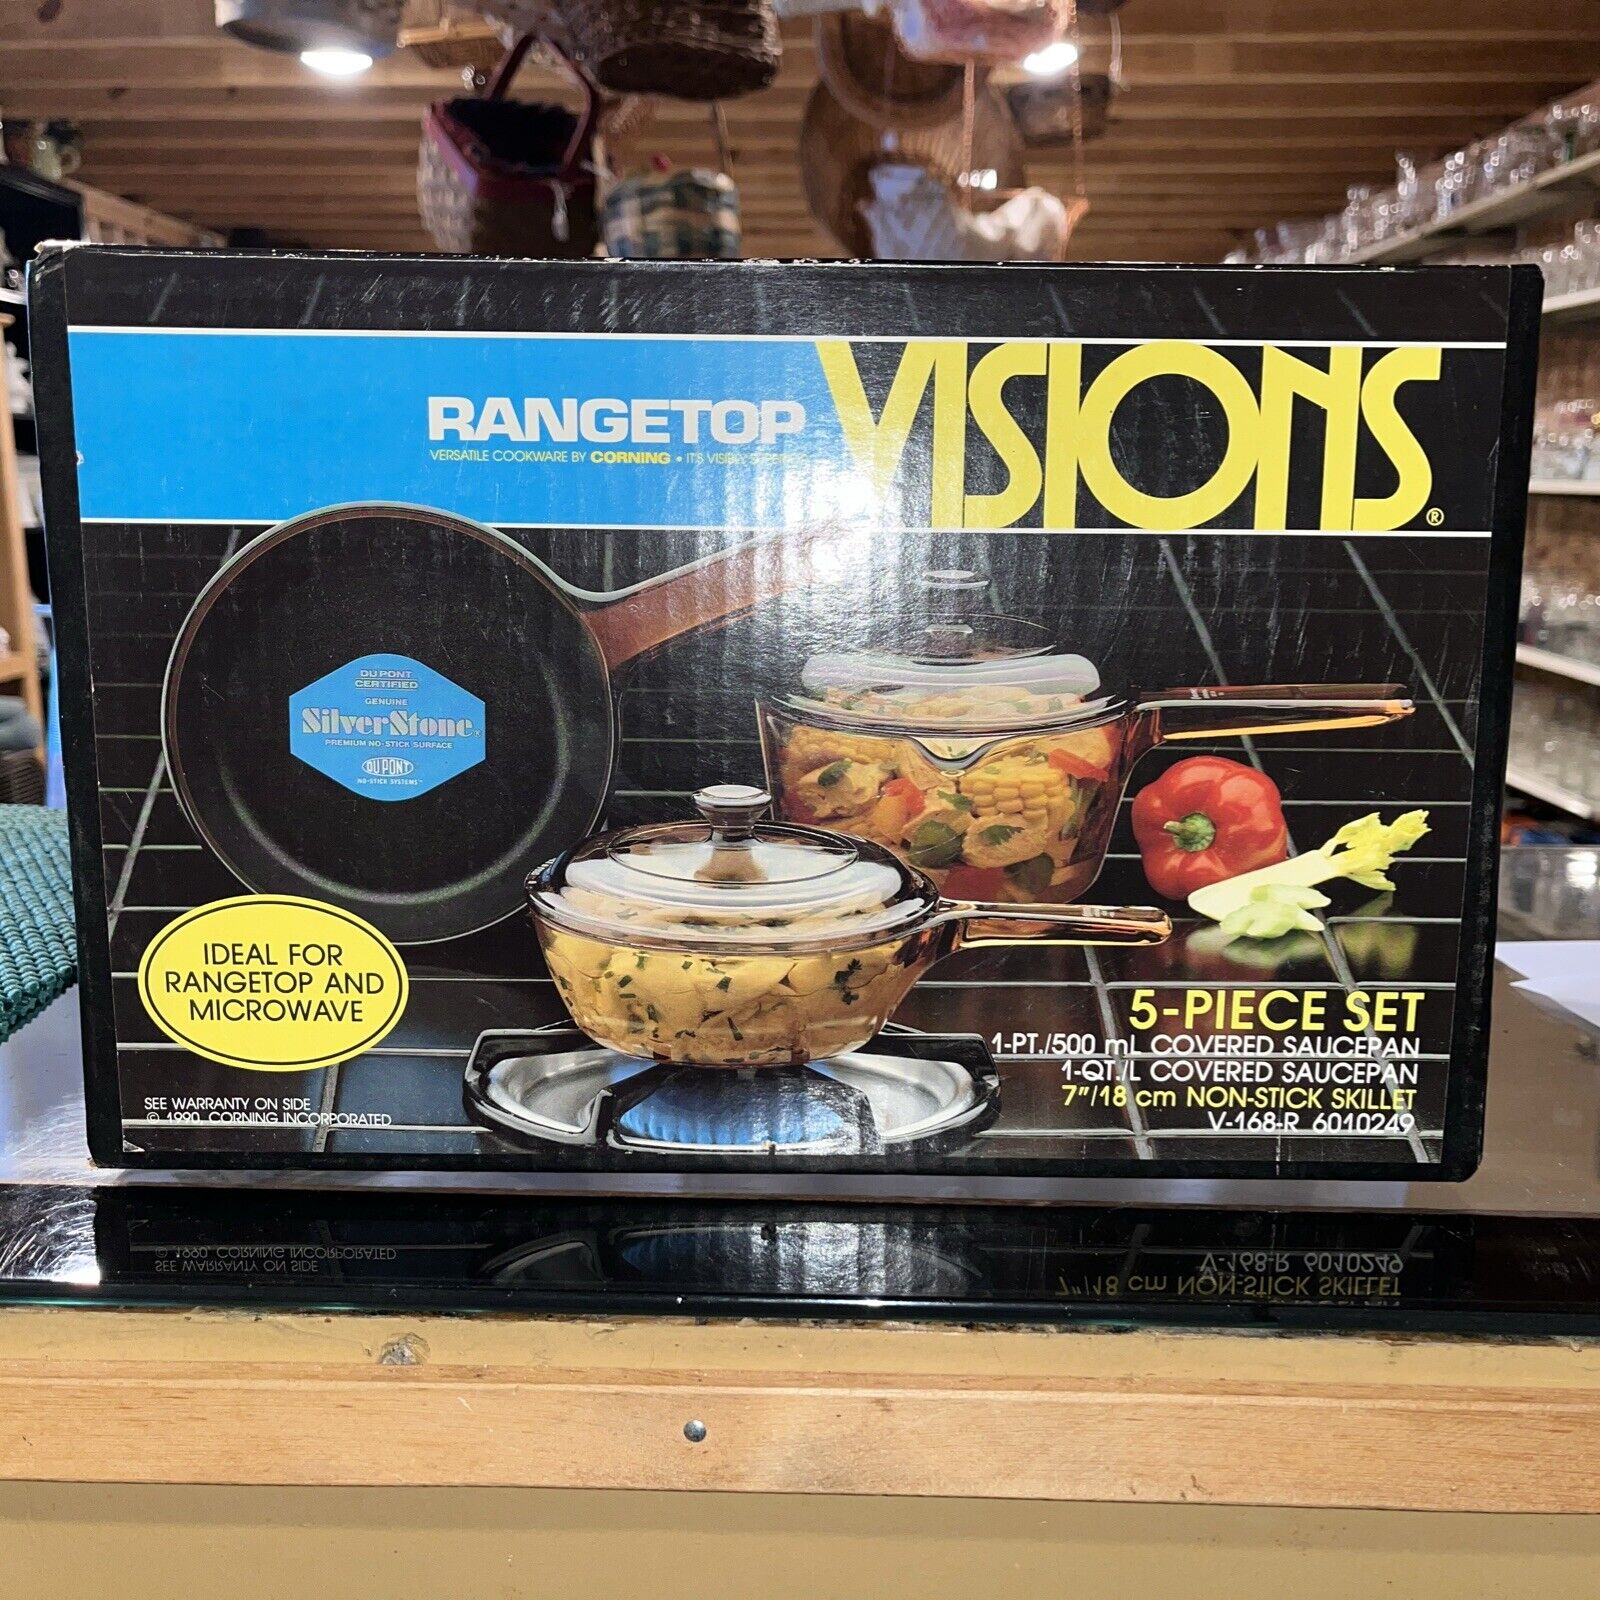 Rangetop Visions By Corning 5-Piece Set 